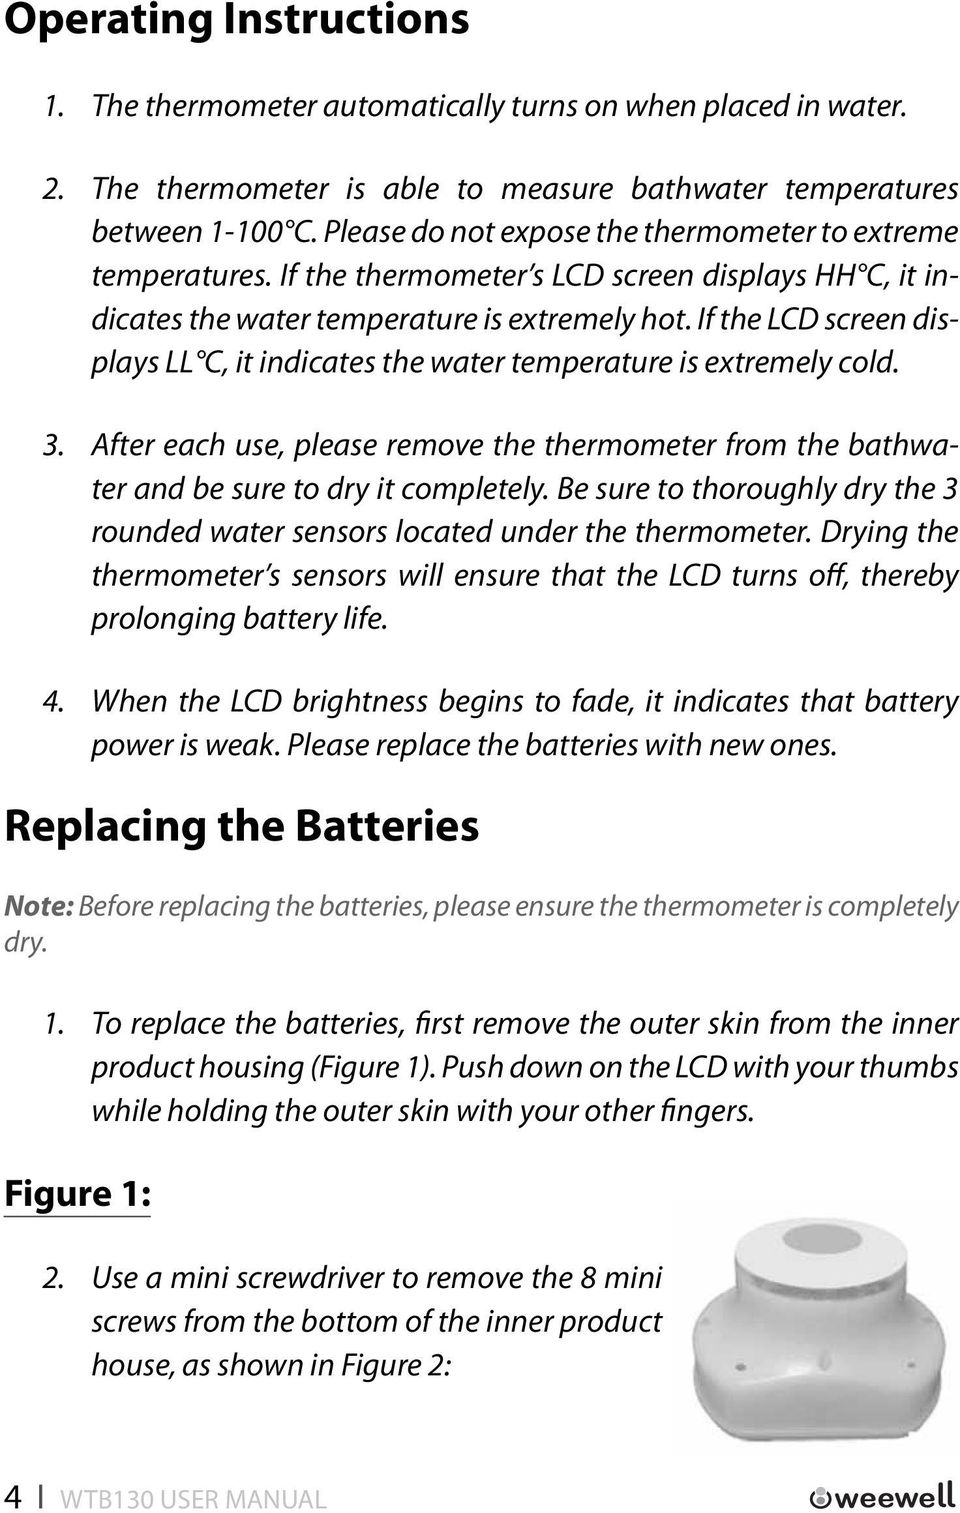 If the LCD screen displays LL C, it indicates the water temperature is extremely cold. 3. After each use, please remove the thermometer from the bathwater and be sure to dry it completely.